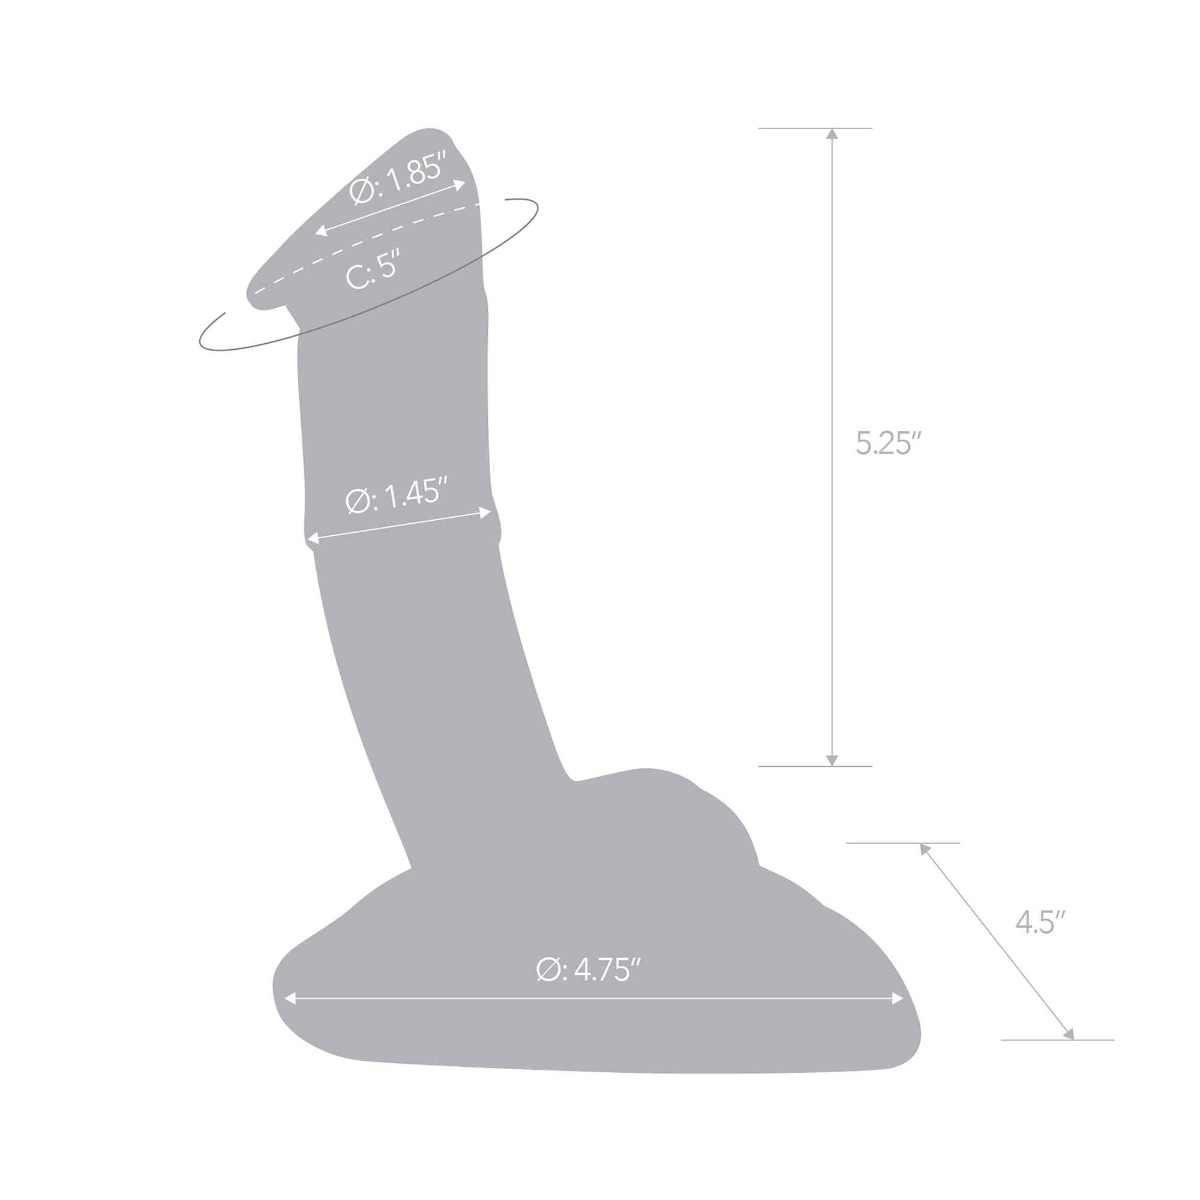 7.5” rideable standing glass cock with stability base